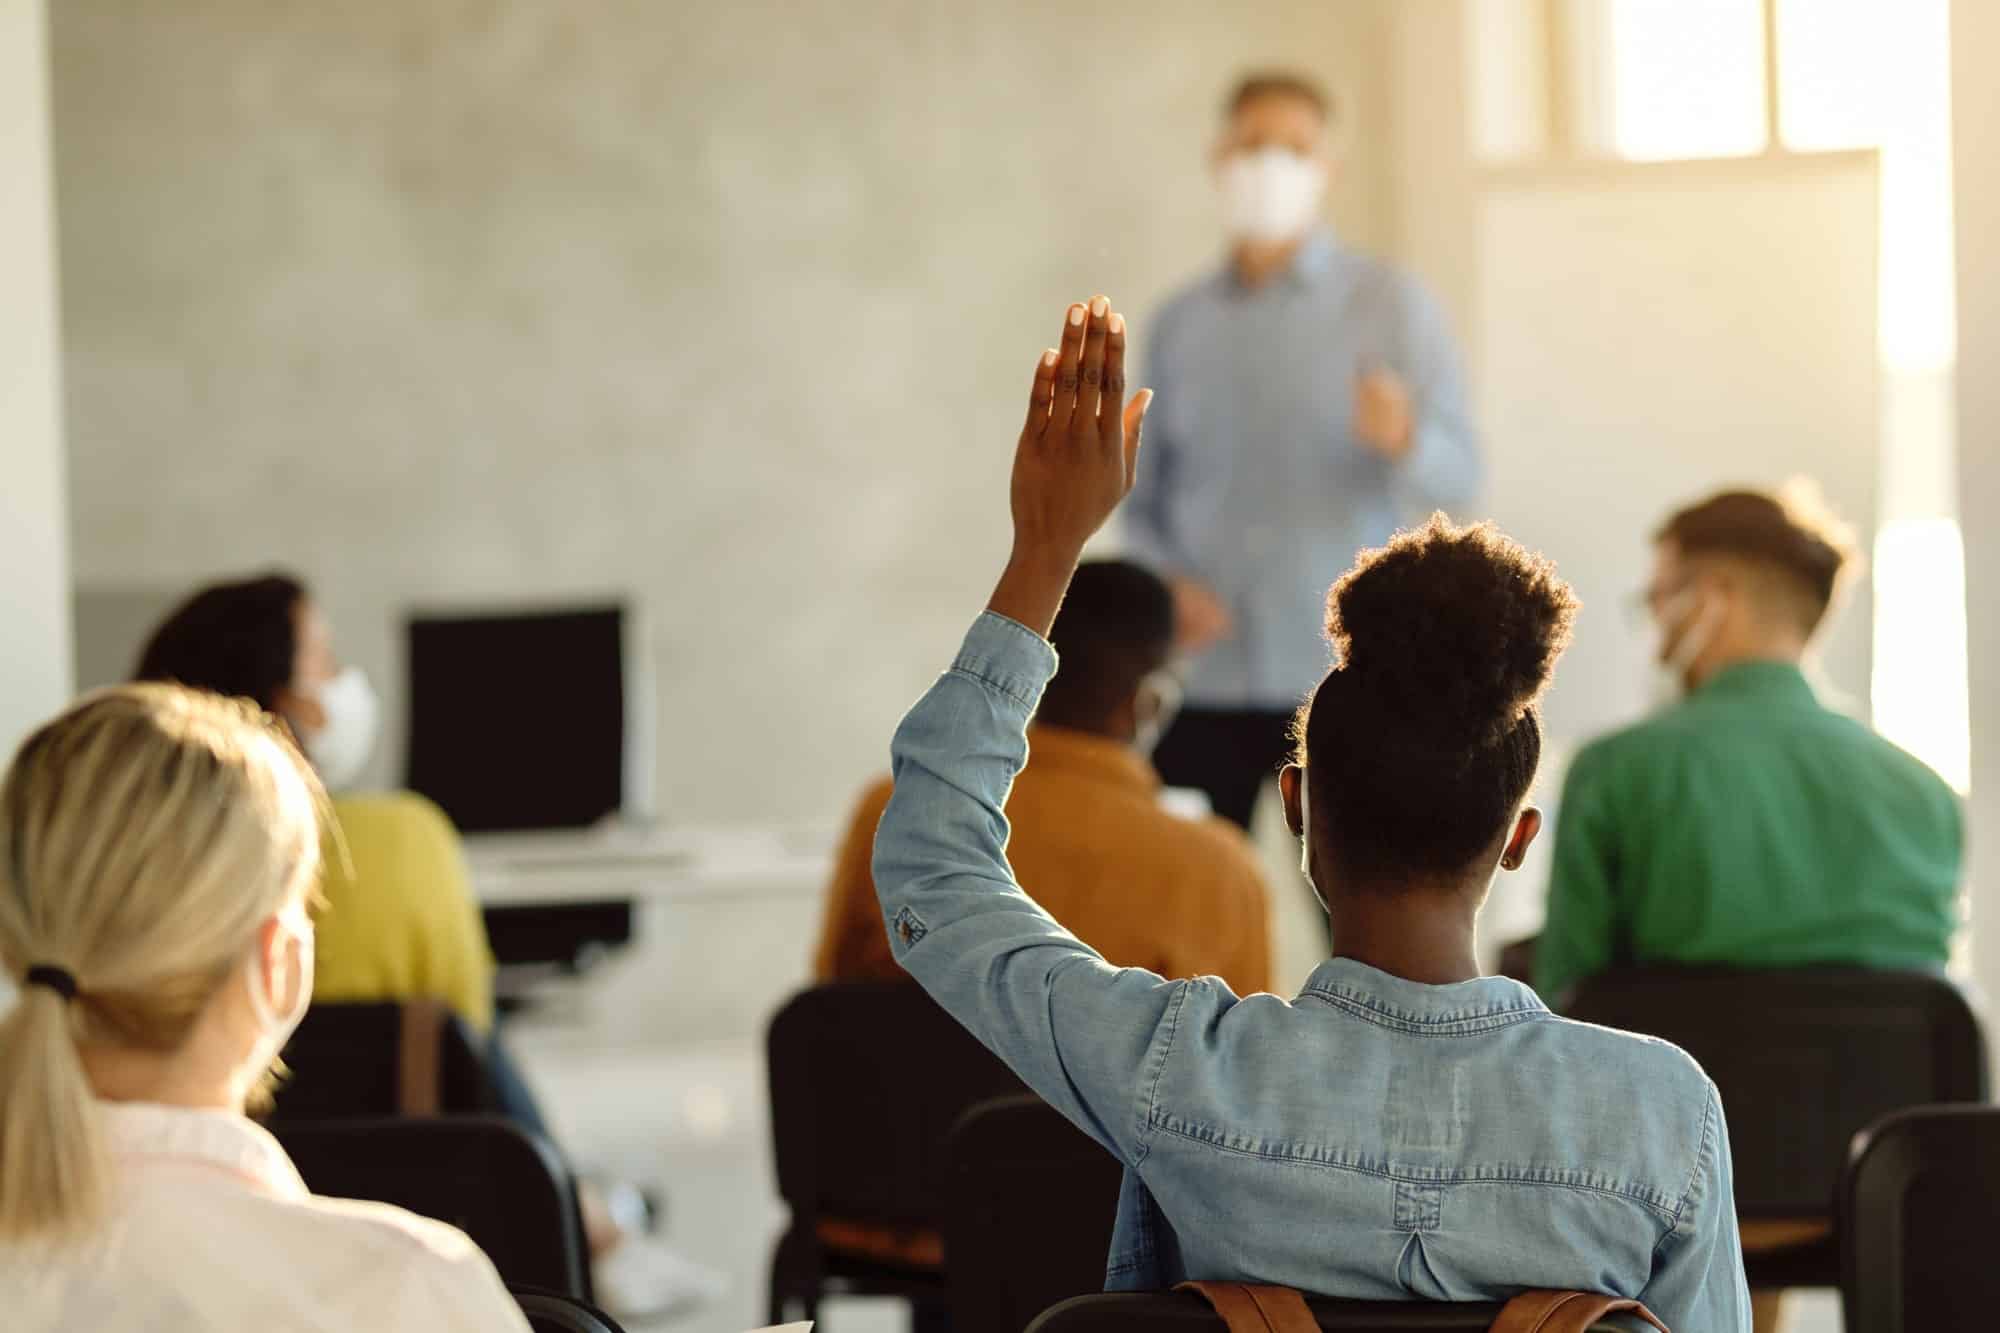 Student raising hand among students in classroom